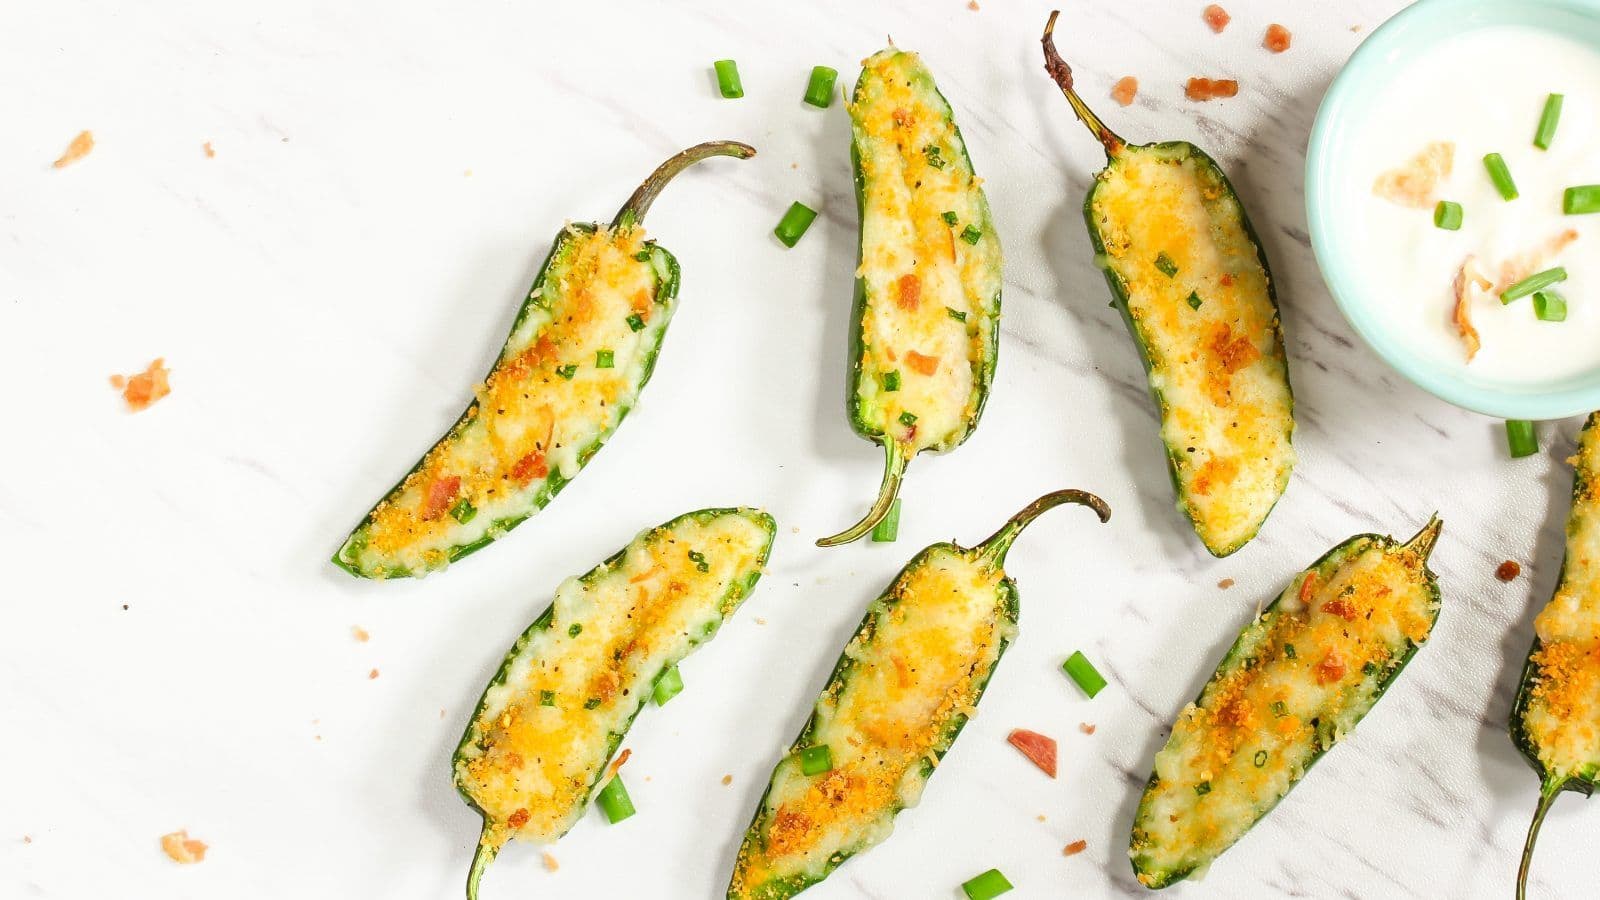 Gorge on these sizzling vegan jalapeno appetizers